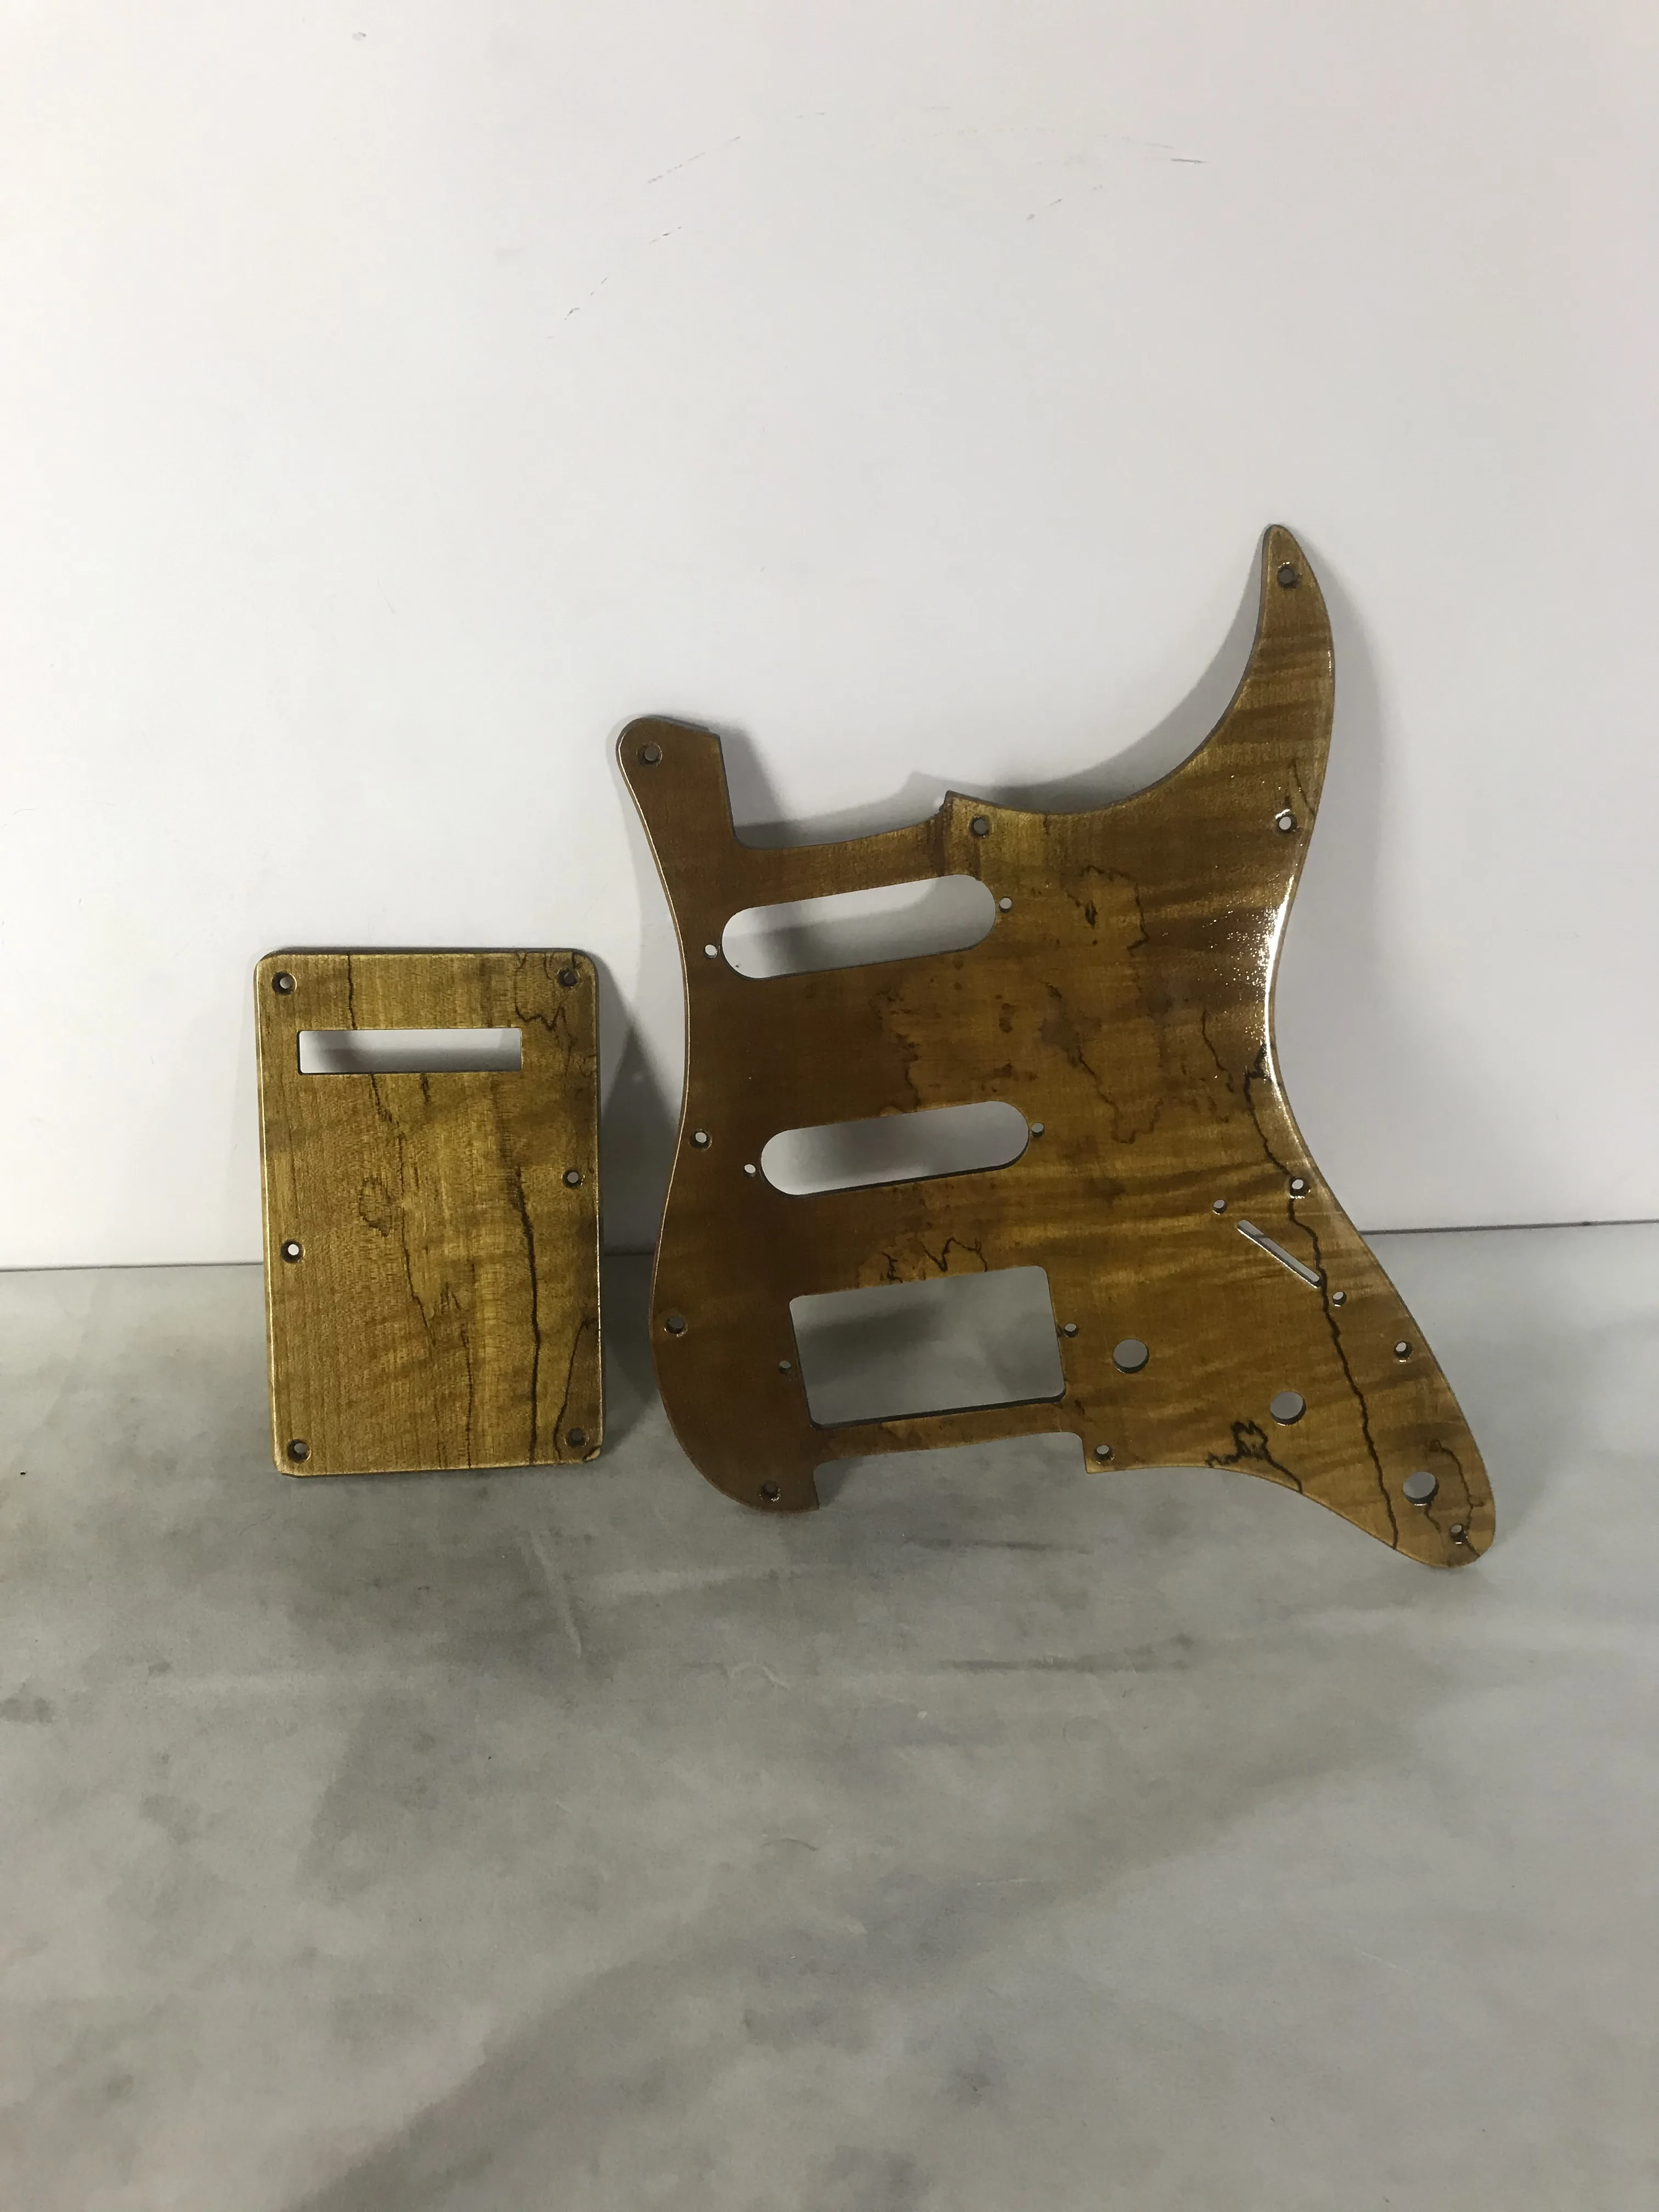 

1Pcs of Fender Style Flamed Maple Strat ST Electric Guitar Pickguard SSH HSH Nice Finished Essential Color Guitarra Pick Guard